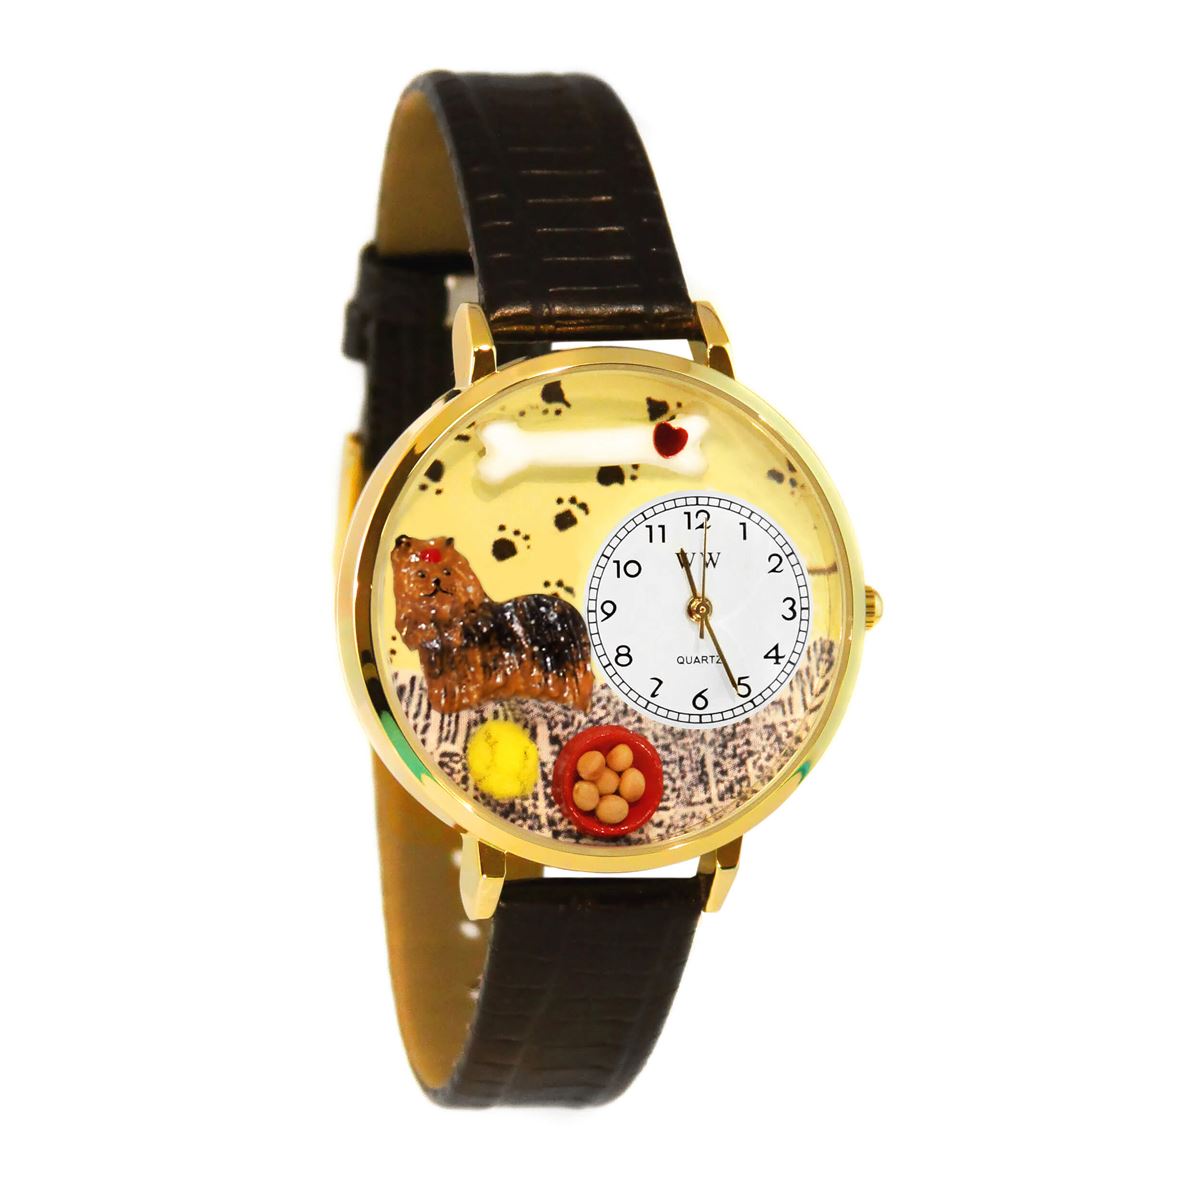 Whimsical Gifts | Yorkie 3D Watch Large Style | Handmade in USA | Animal Lover | Dog Lover | Novelty Unique Fun Miniatures Gift | Gold Finish Black Leather Watch Band